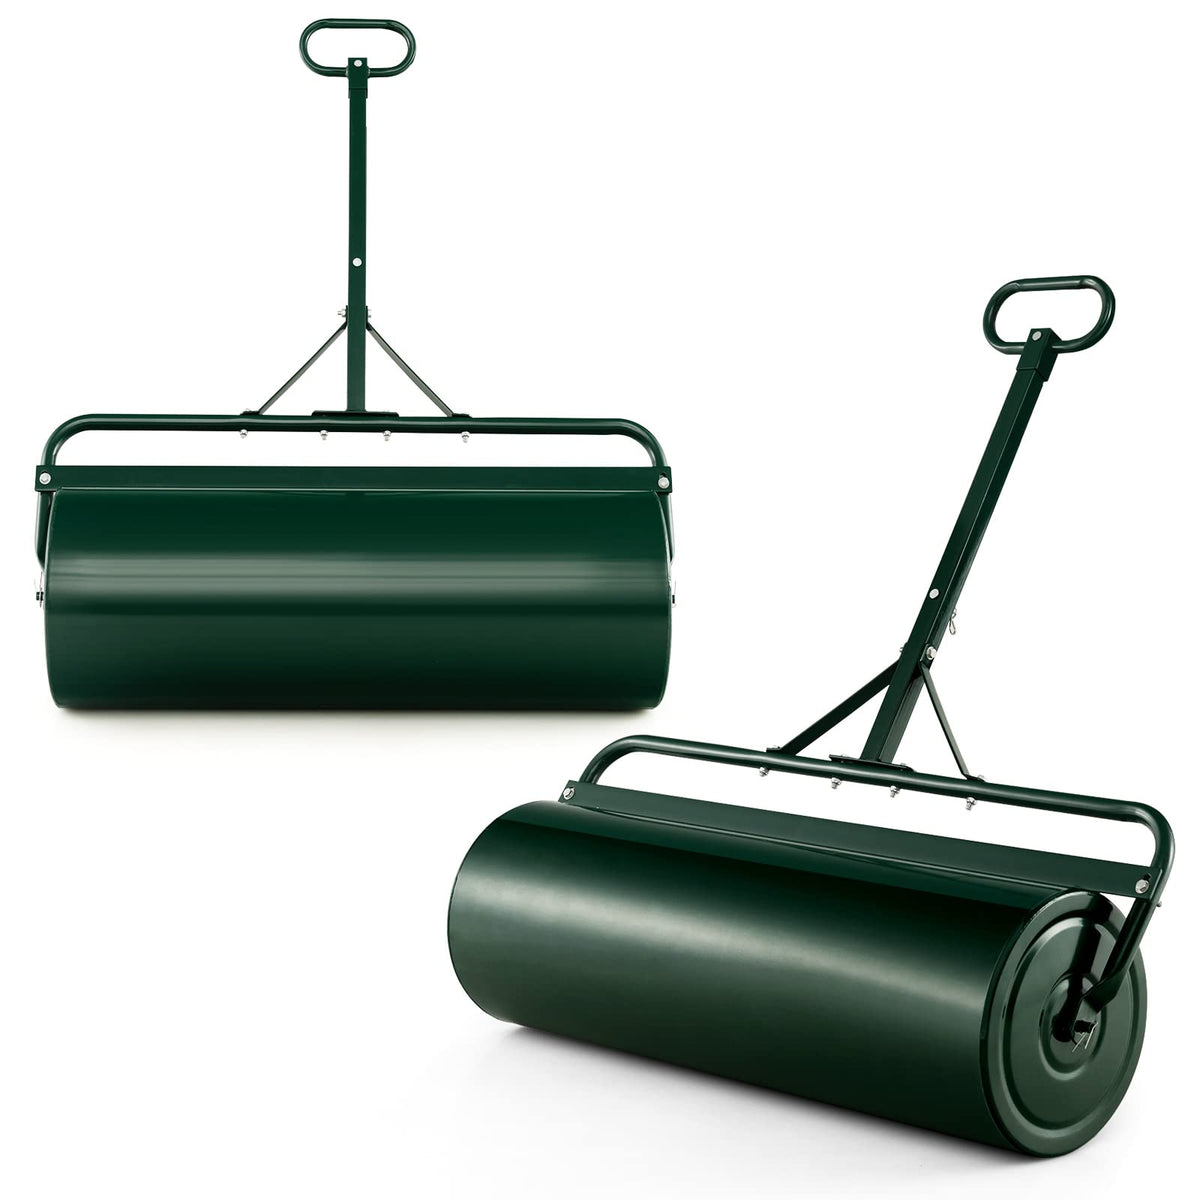 Goplus Lawn Roller, Push/Tow-Behind Lawn Roller, 30 Gallon/113L Water/Sand-Filled Sod Roller with Detachable Gripping Handle